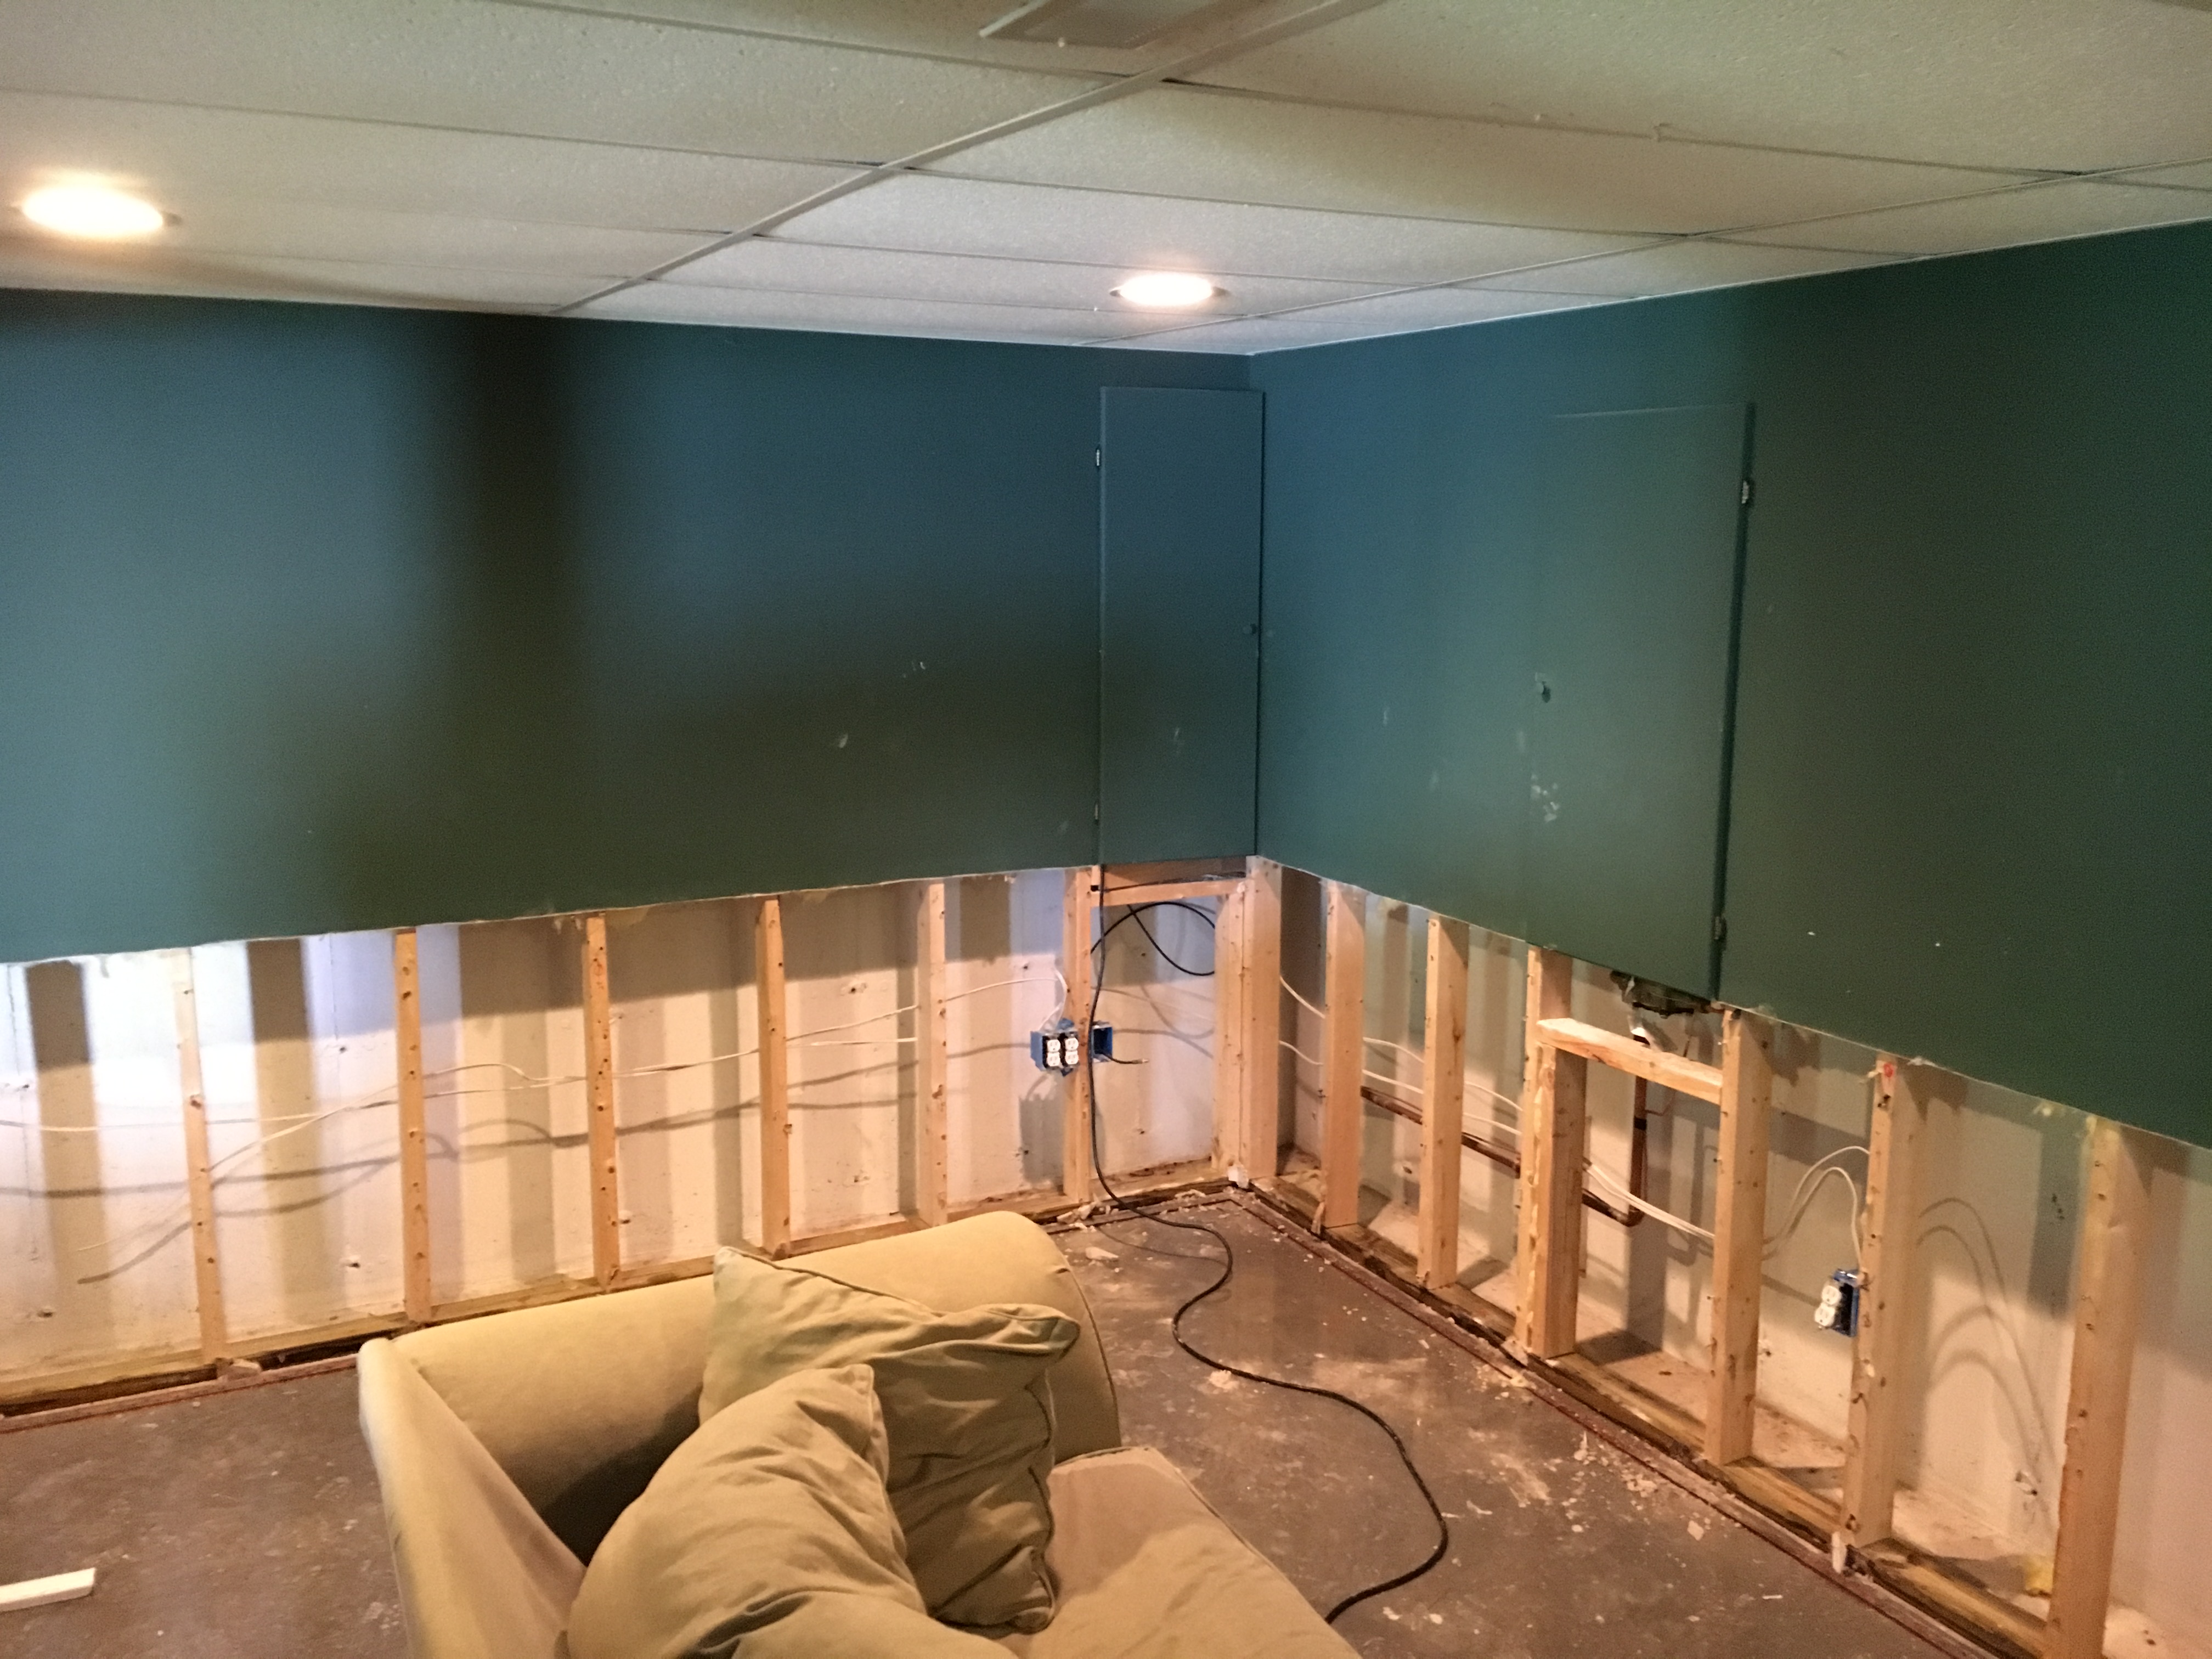 After water damage to this Milford, NH homes basement the drywall needed to be removed to expose the wall. The water had wicked up the walls about 30 inches. Opening the walls allows for proper drying of the studs and floor plate.